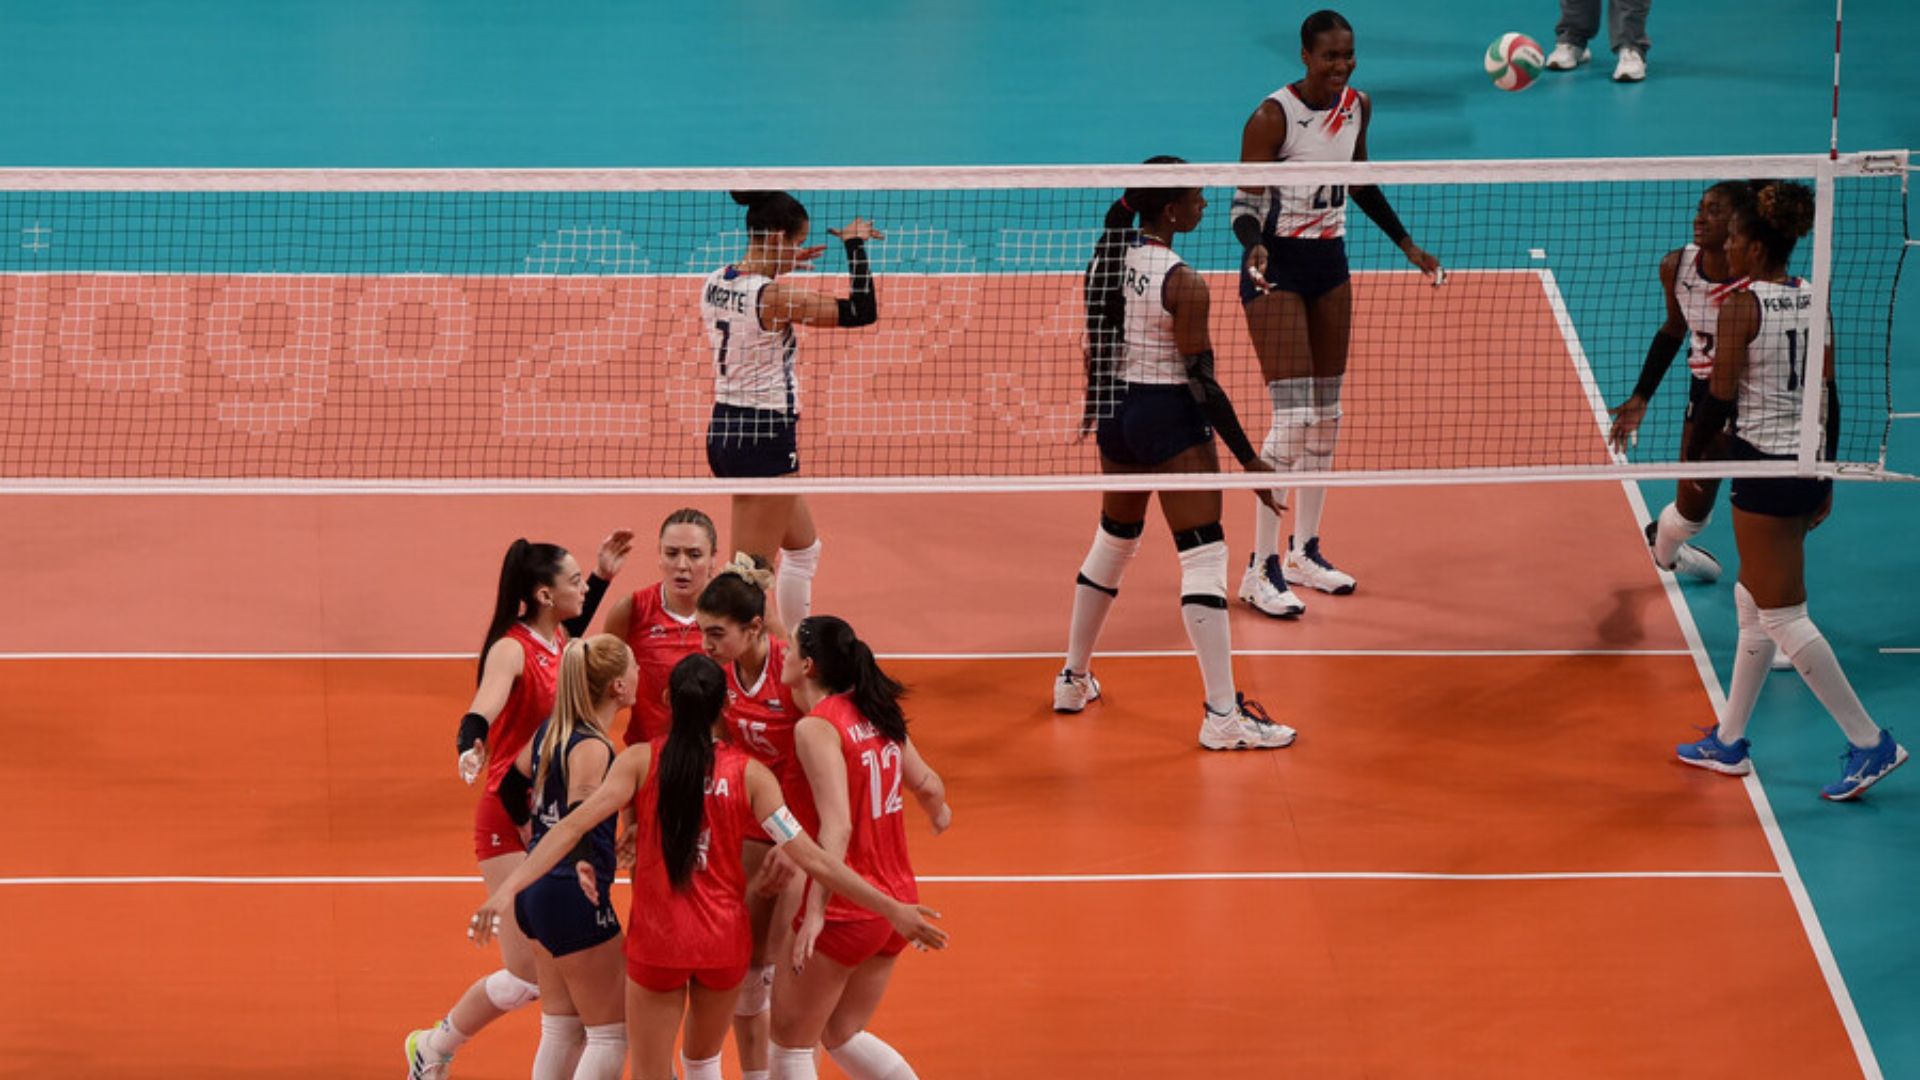 Chile achieves an important victory in female volleyball